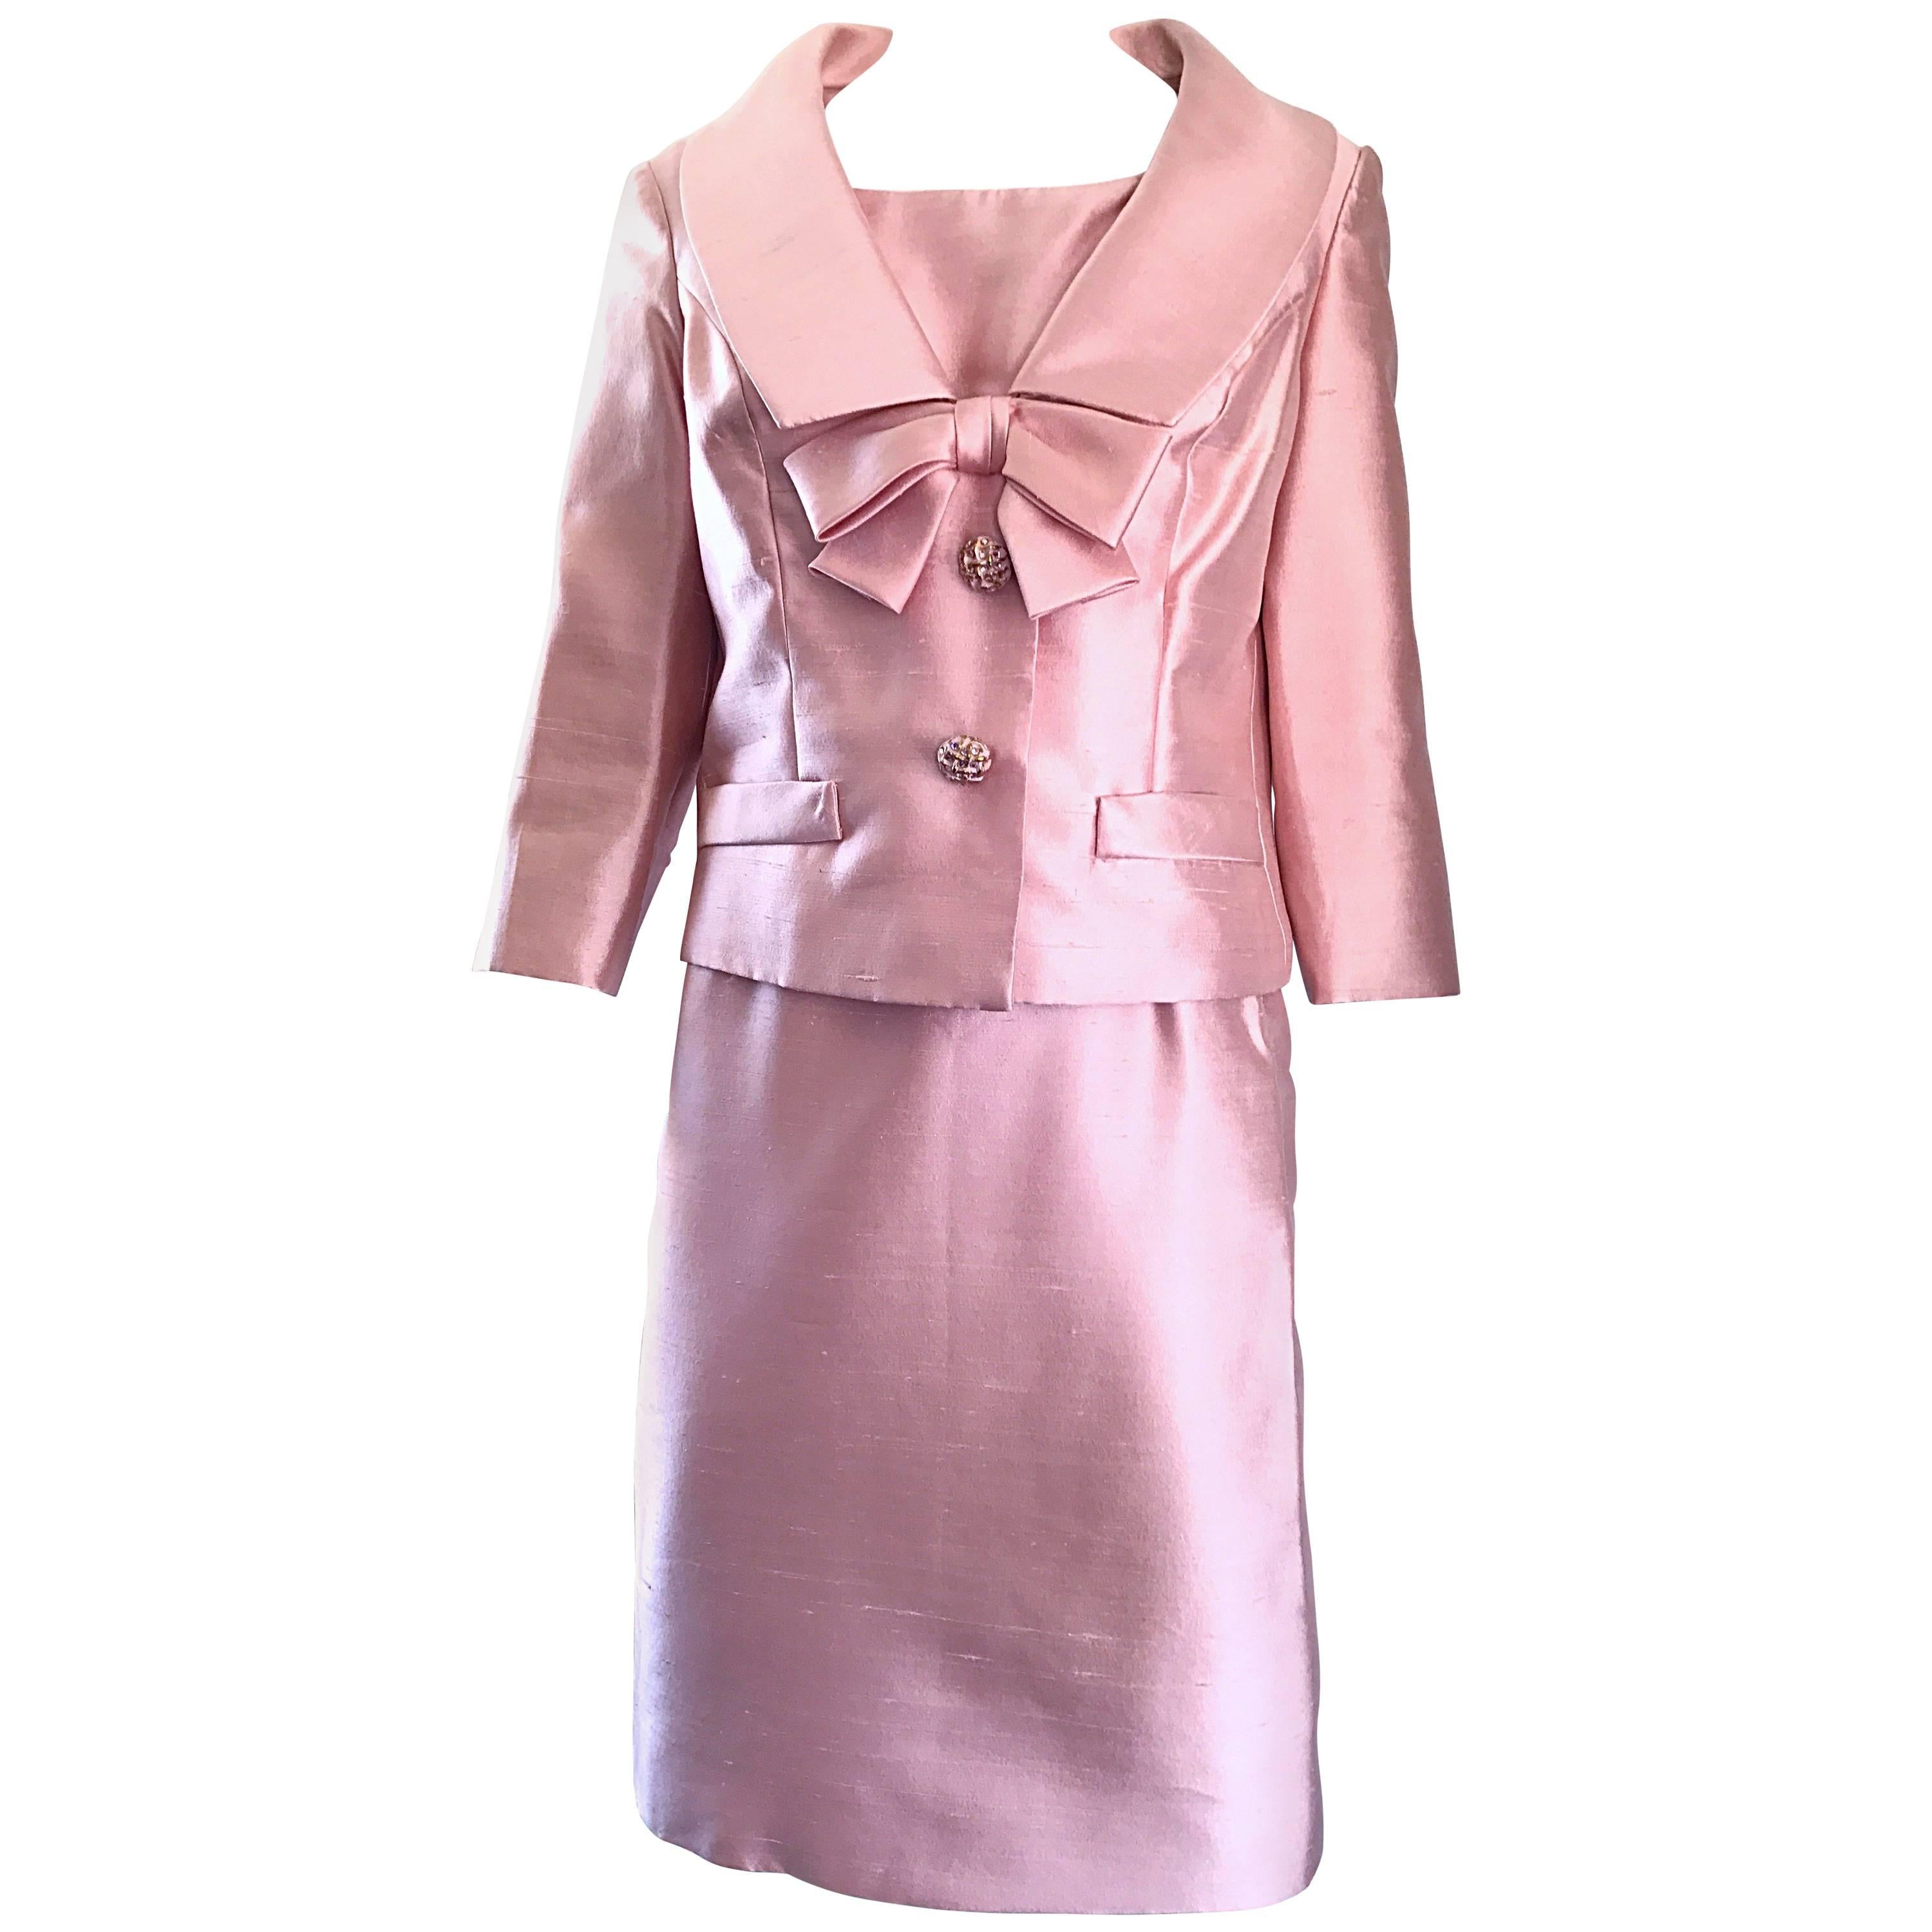 Gorgeous 1960s Demi Couture Pale Pink Silk Shantung Dress and Jacket Ensemble  For Sale